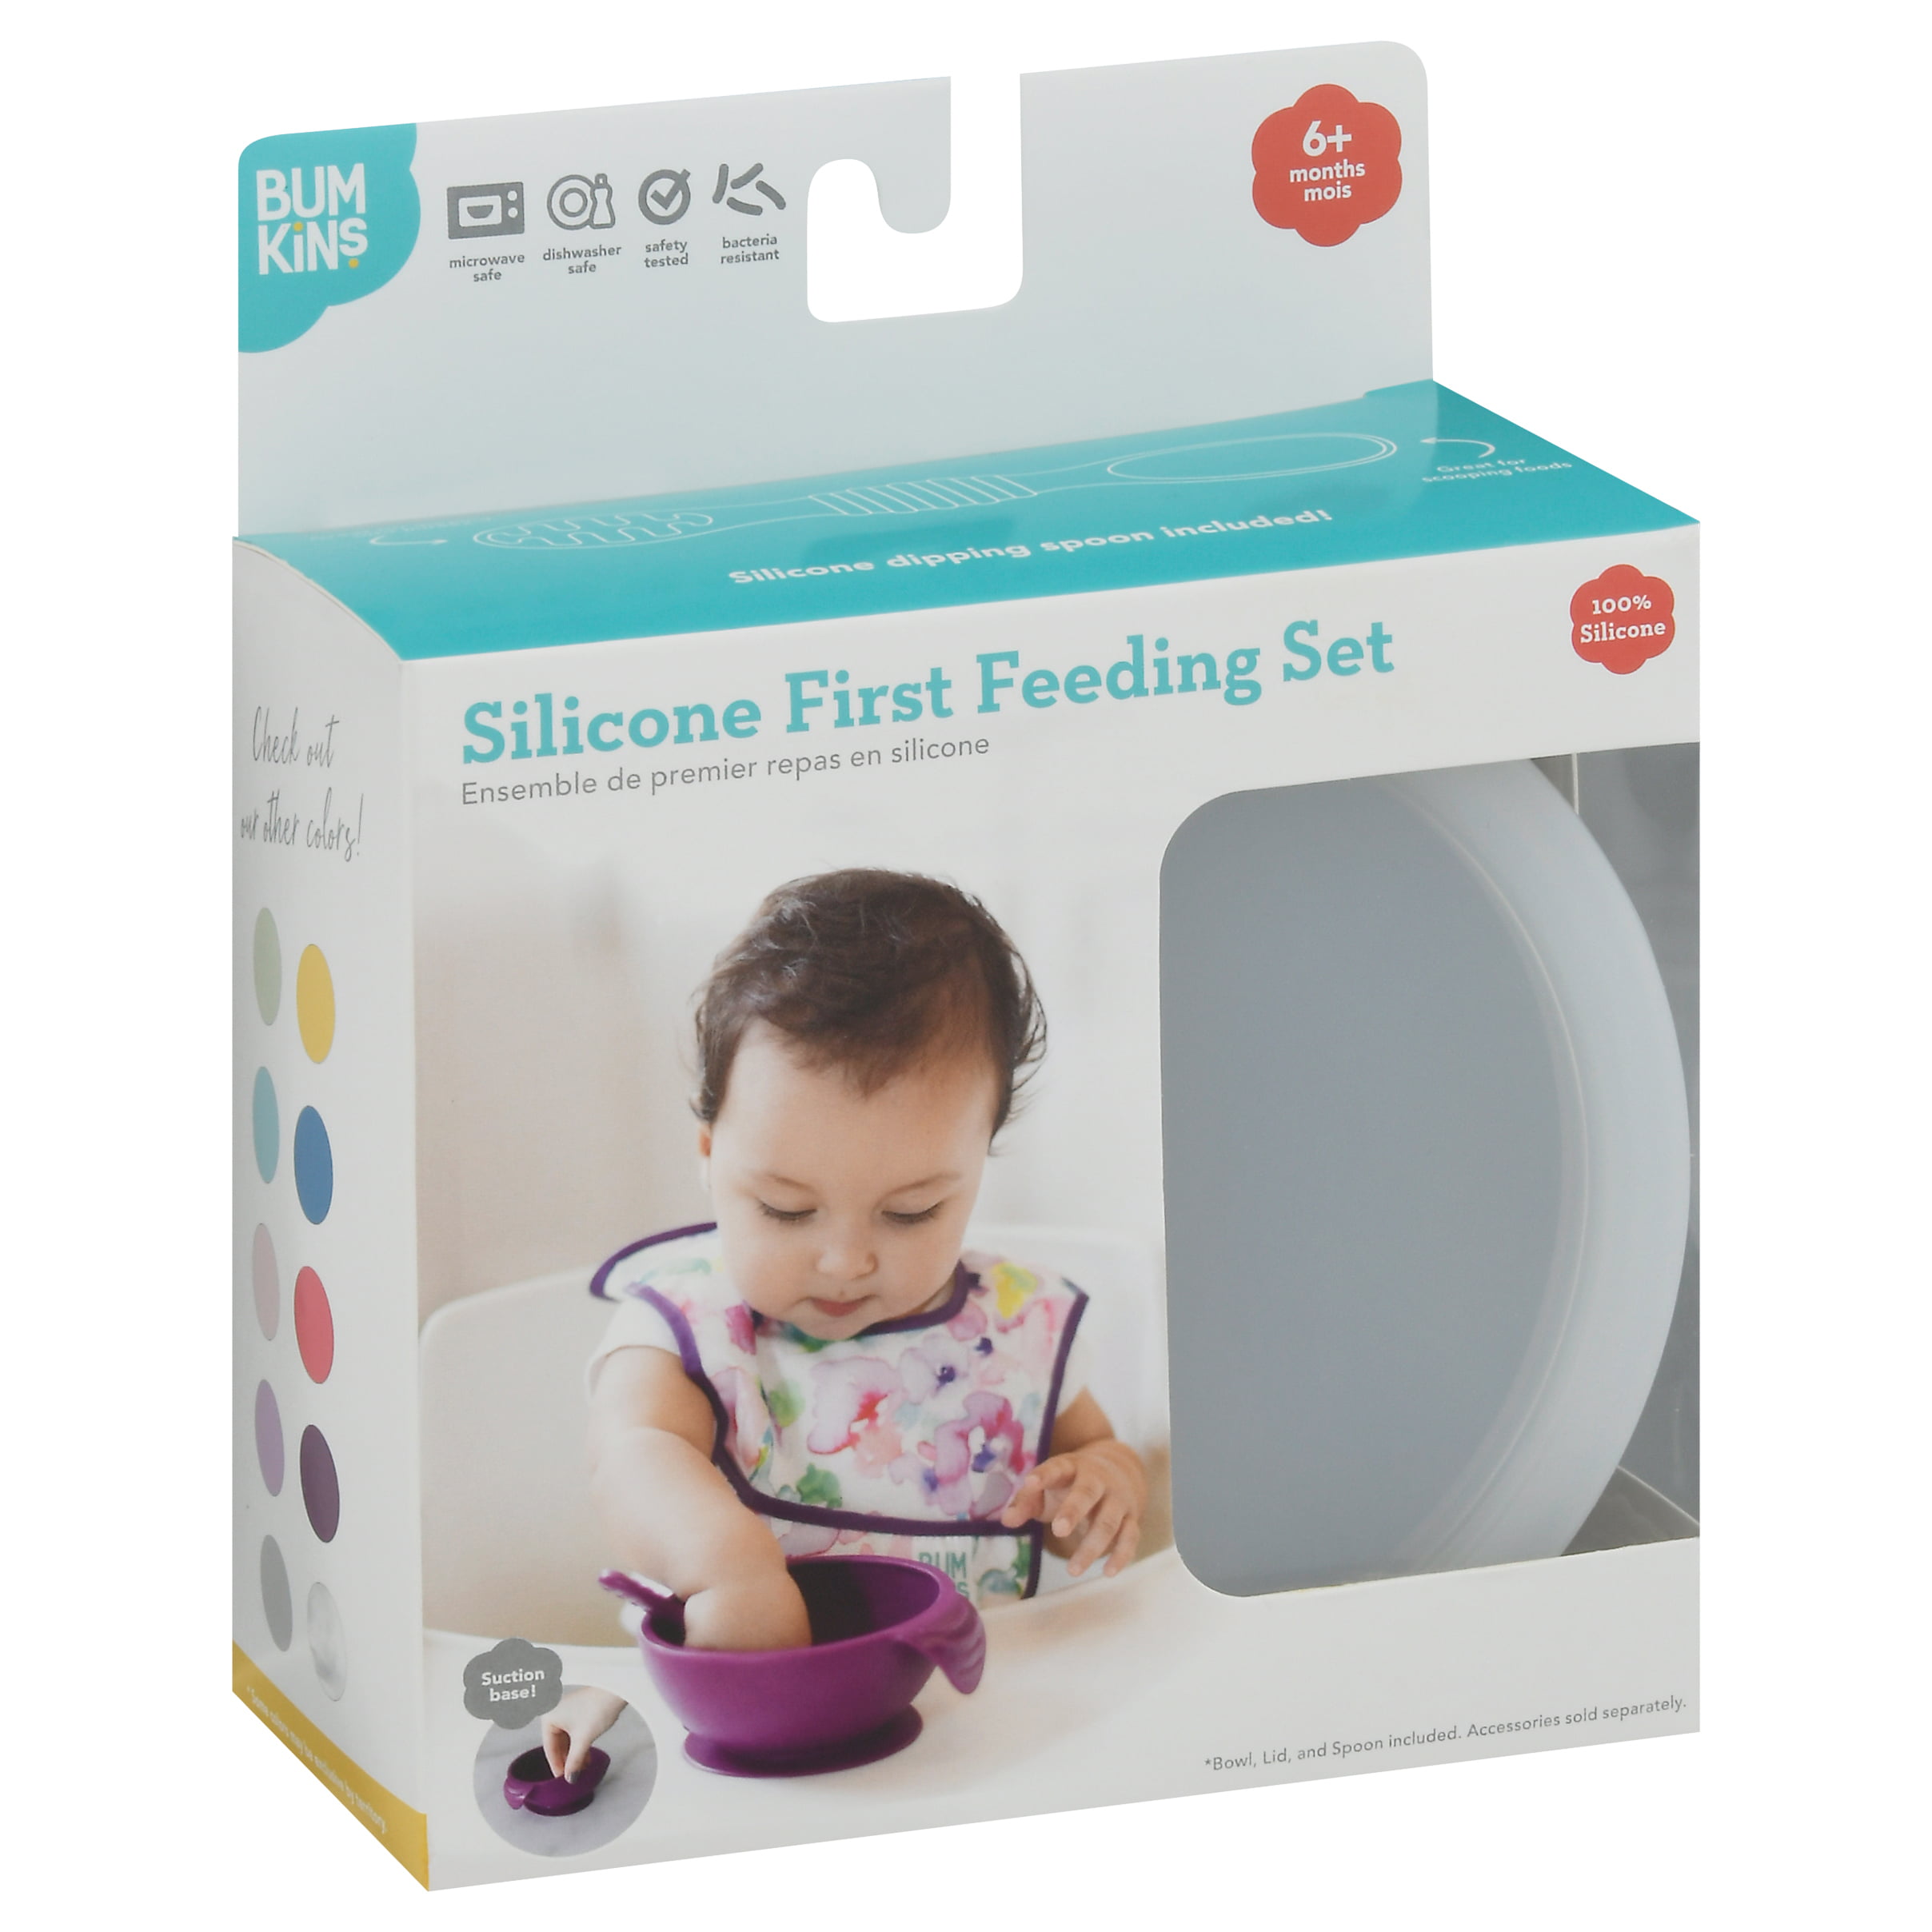 Bumkins Baby Silicone First Feeding Set w/ Lid & Spoon for Ages 6 months+